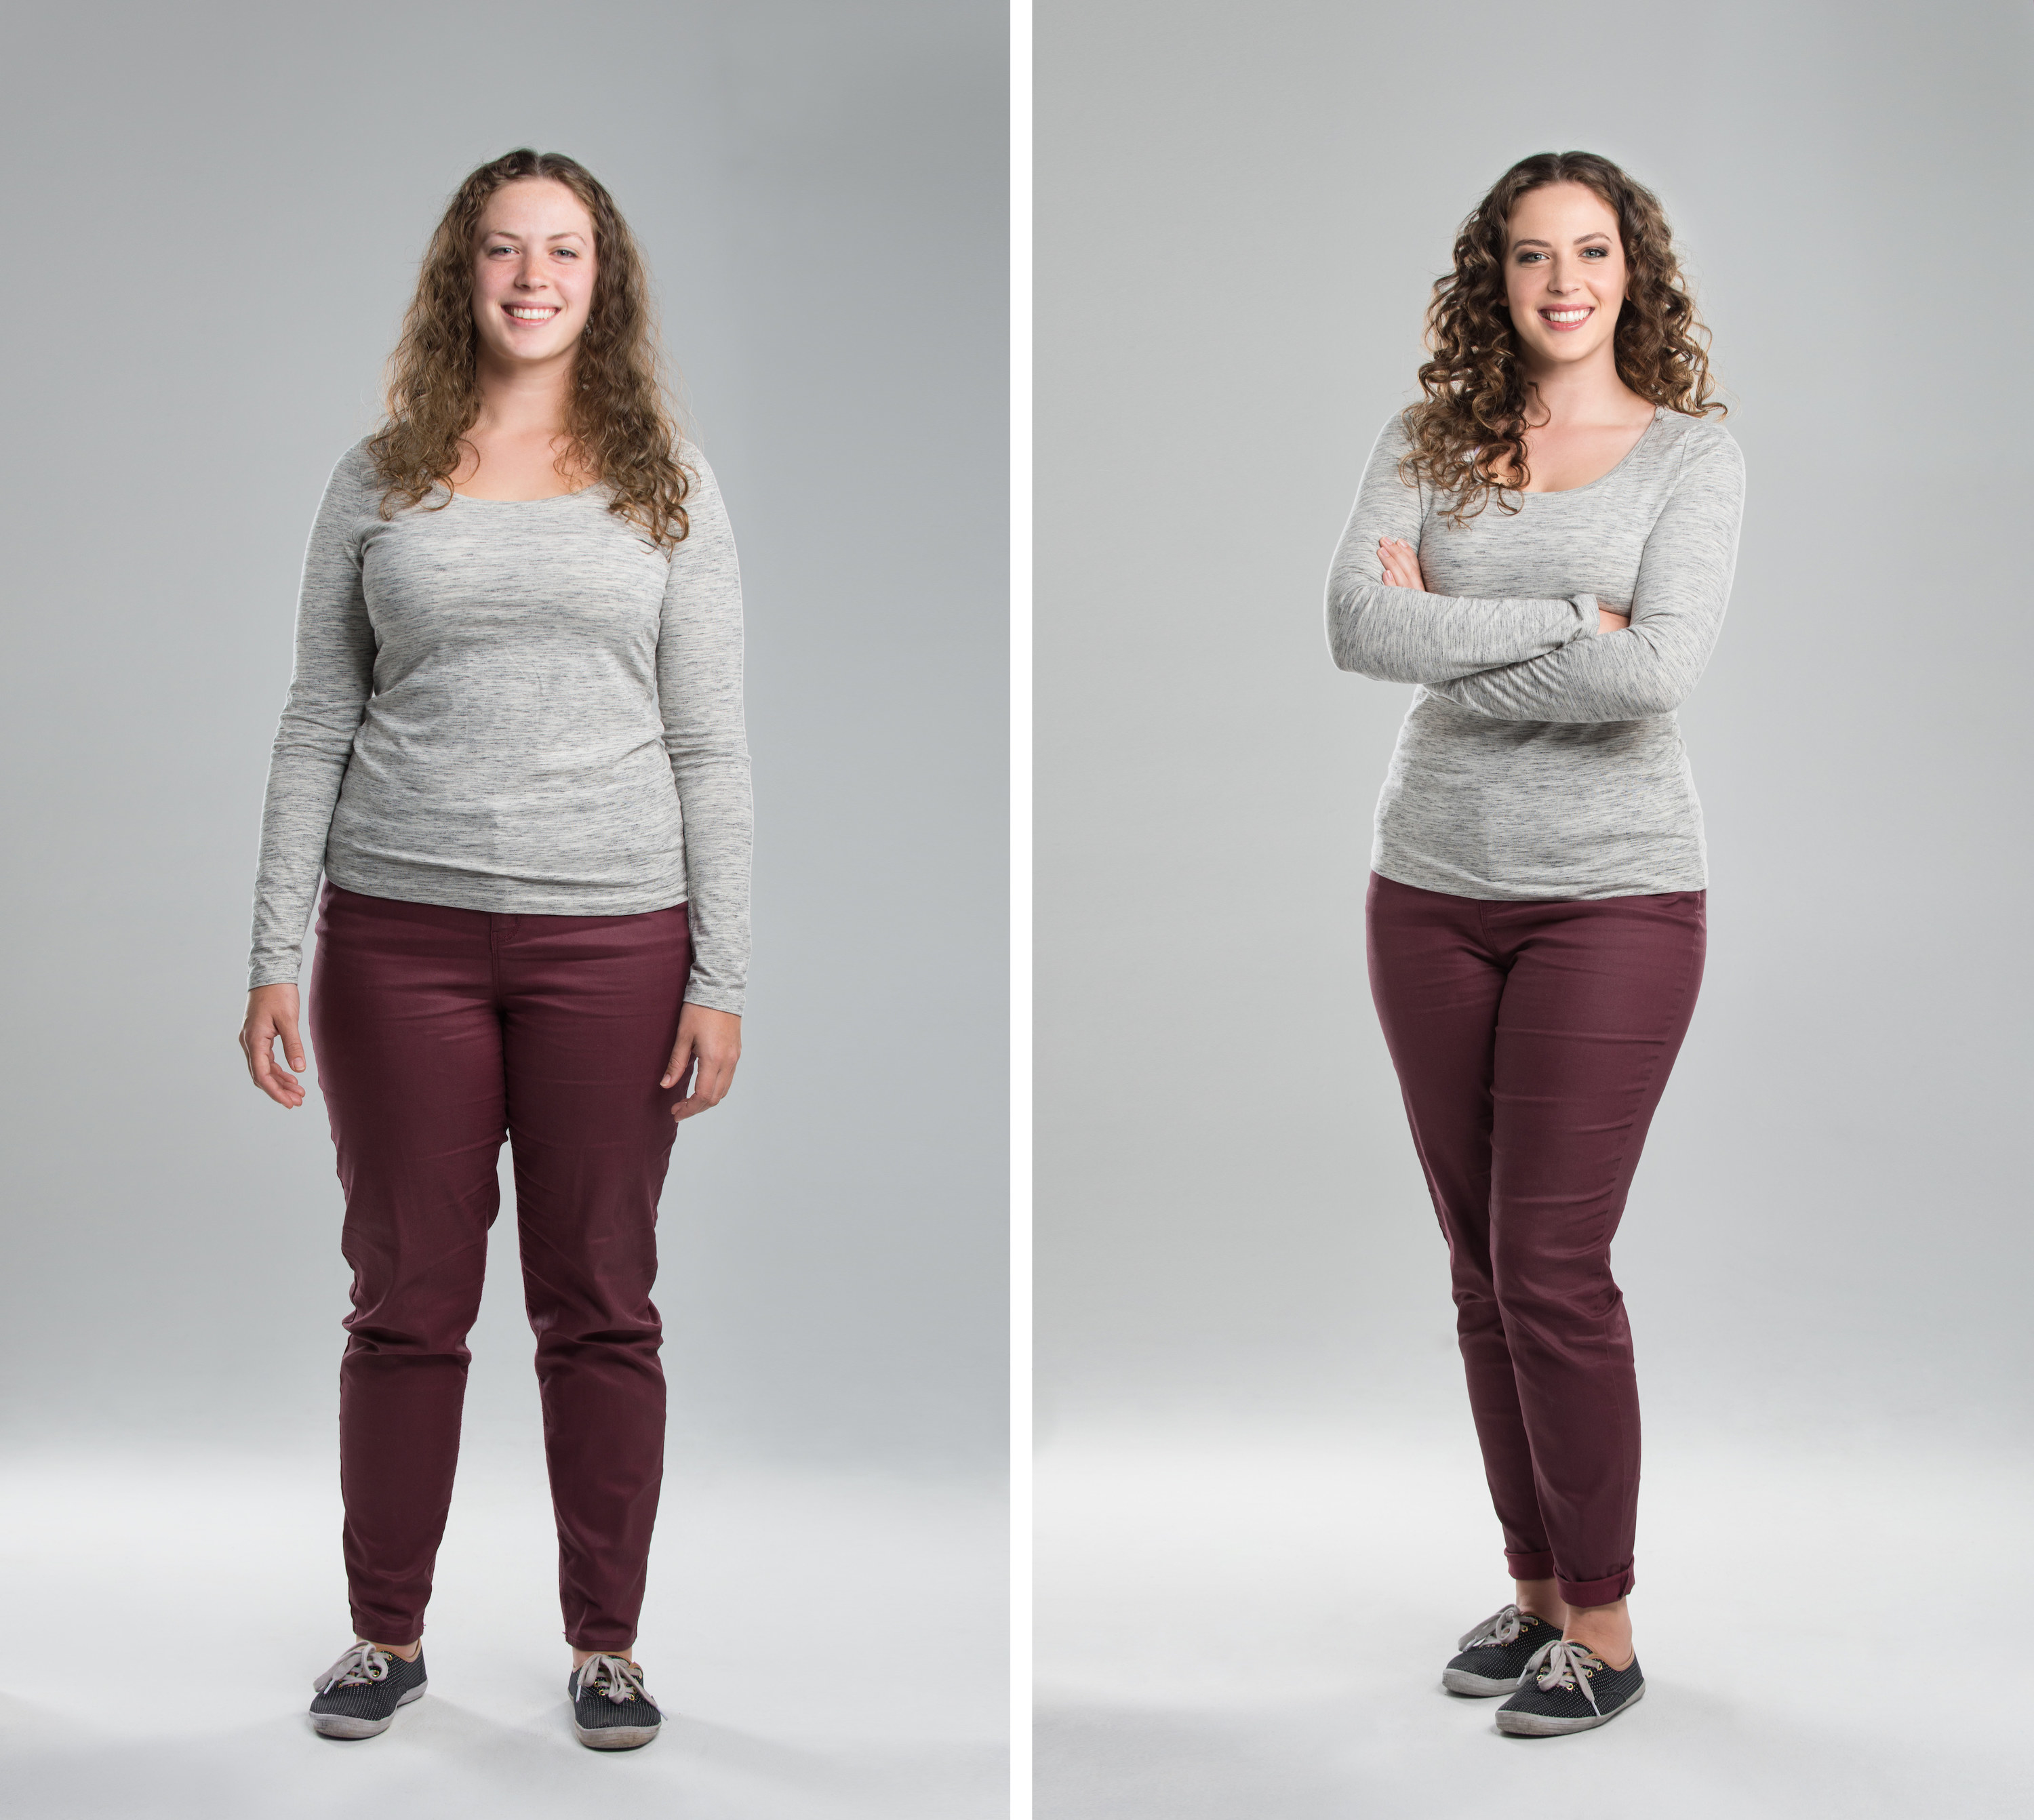 Two views of a woman in a long-sleeved top and pants